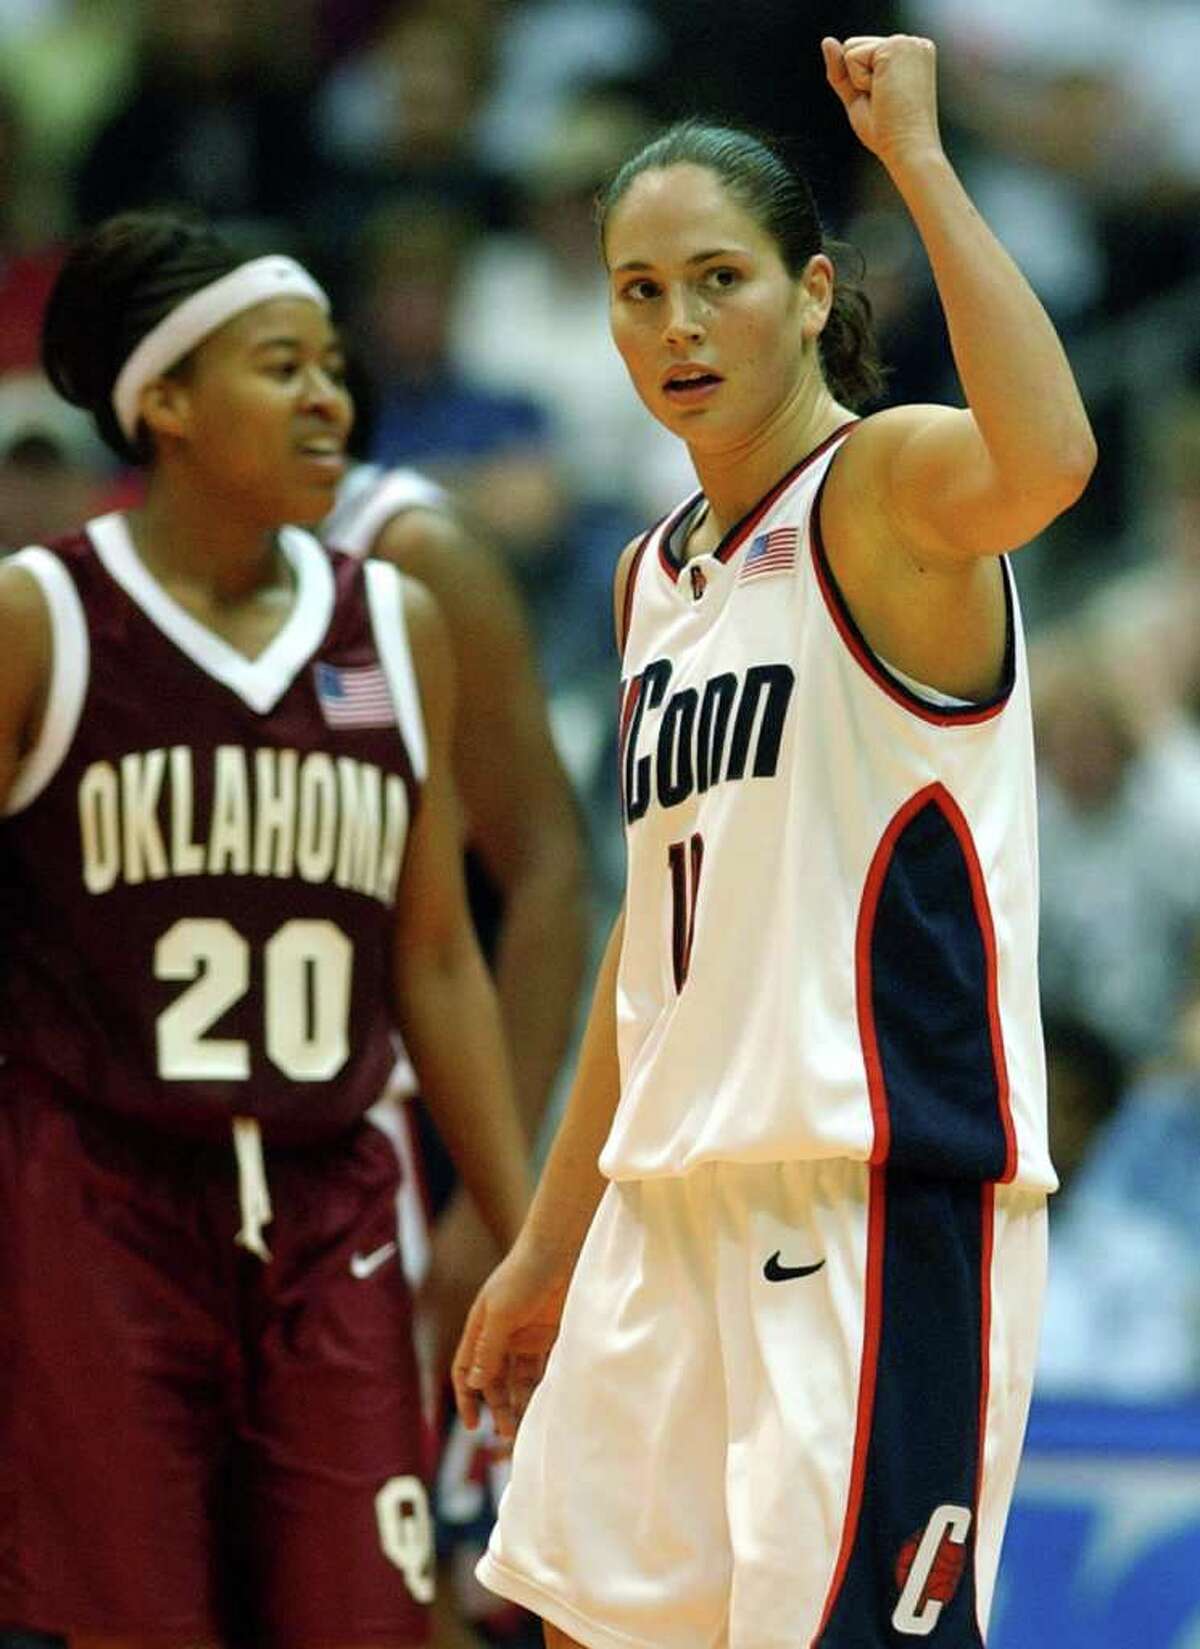 Pictured: UConn's Sue Bird raises her fist after a good play as OU LaNeishea Caulfield looks on during the second half at the Alamodome in San Antonio on Sunday, Mar. 31, 2002. (Kin Man Hui/staff)